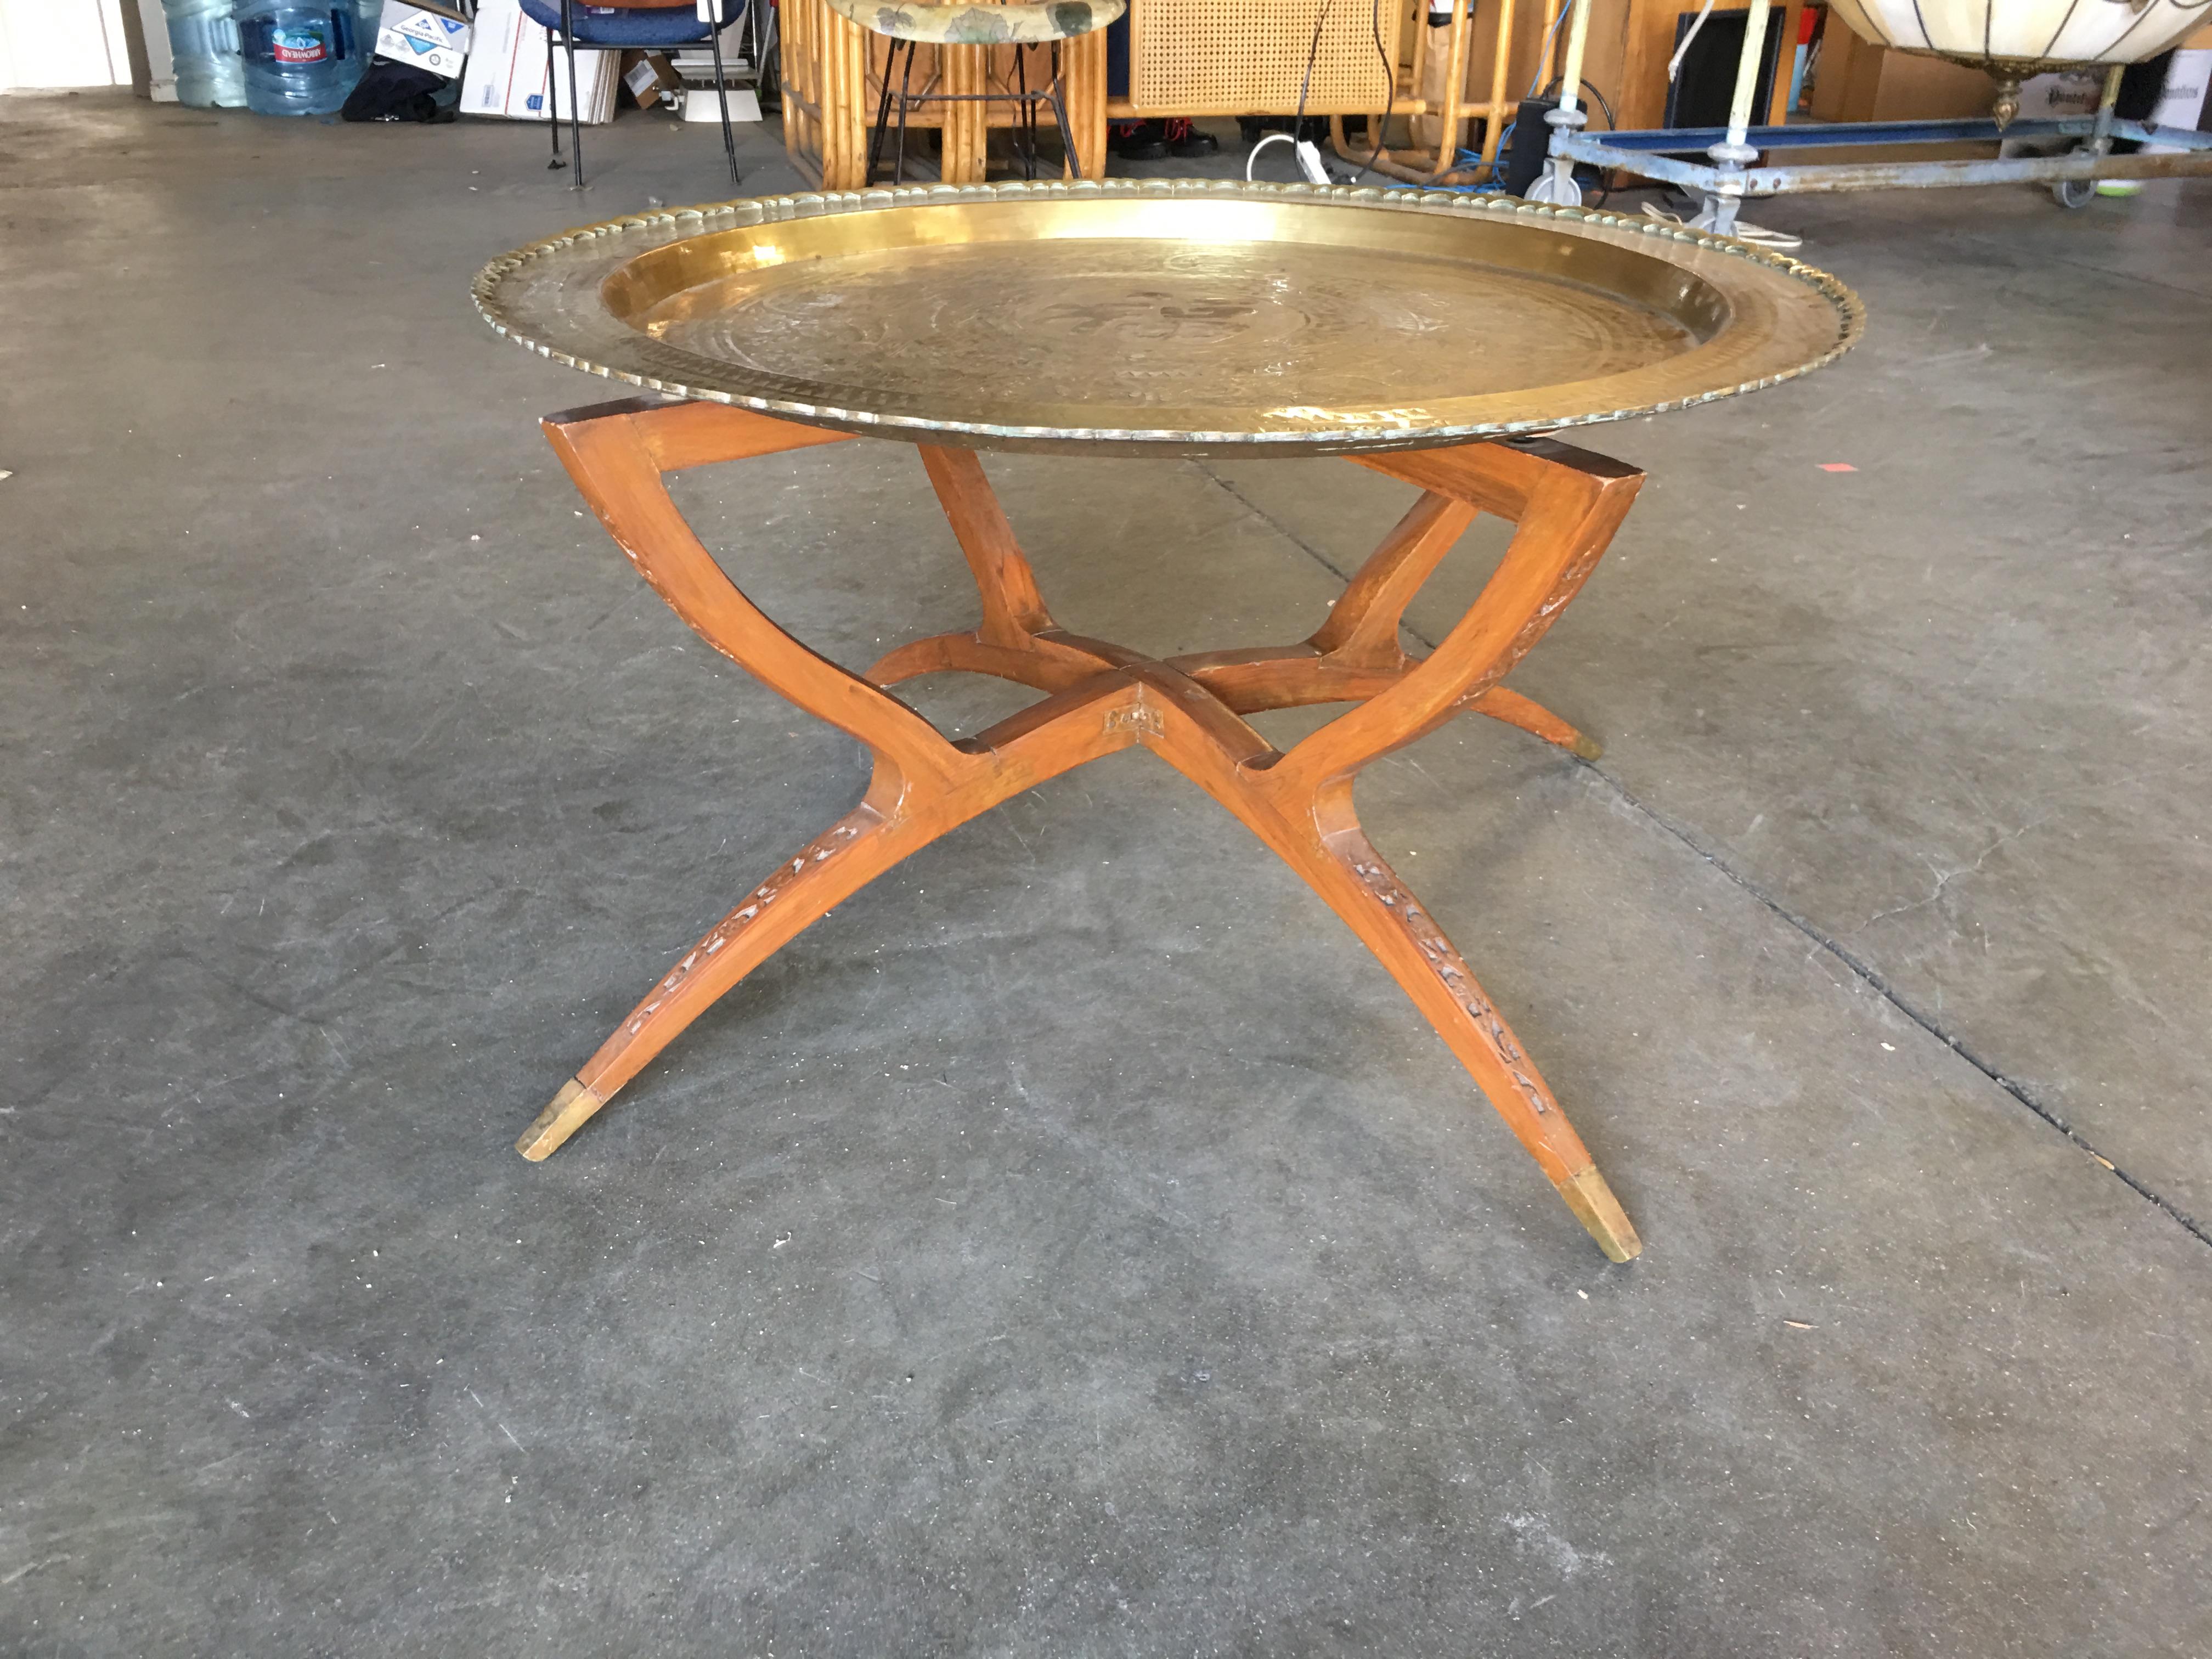 Fabulous folding table with a scalloped brass charger. The brass charger features beautiful etchings inspired by Eastern Asia with a large Chinese character for 